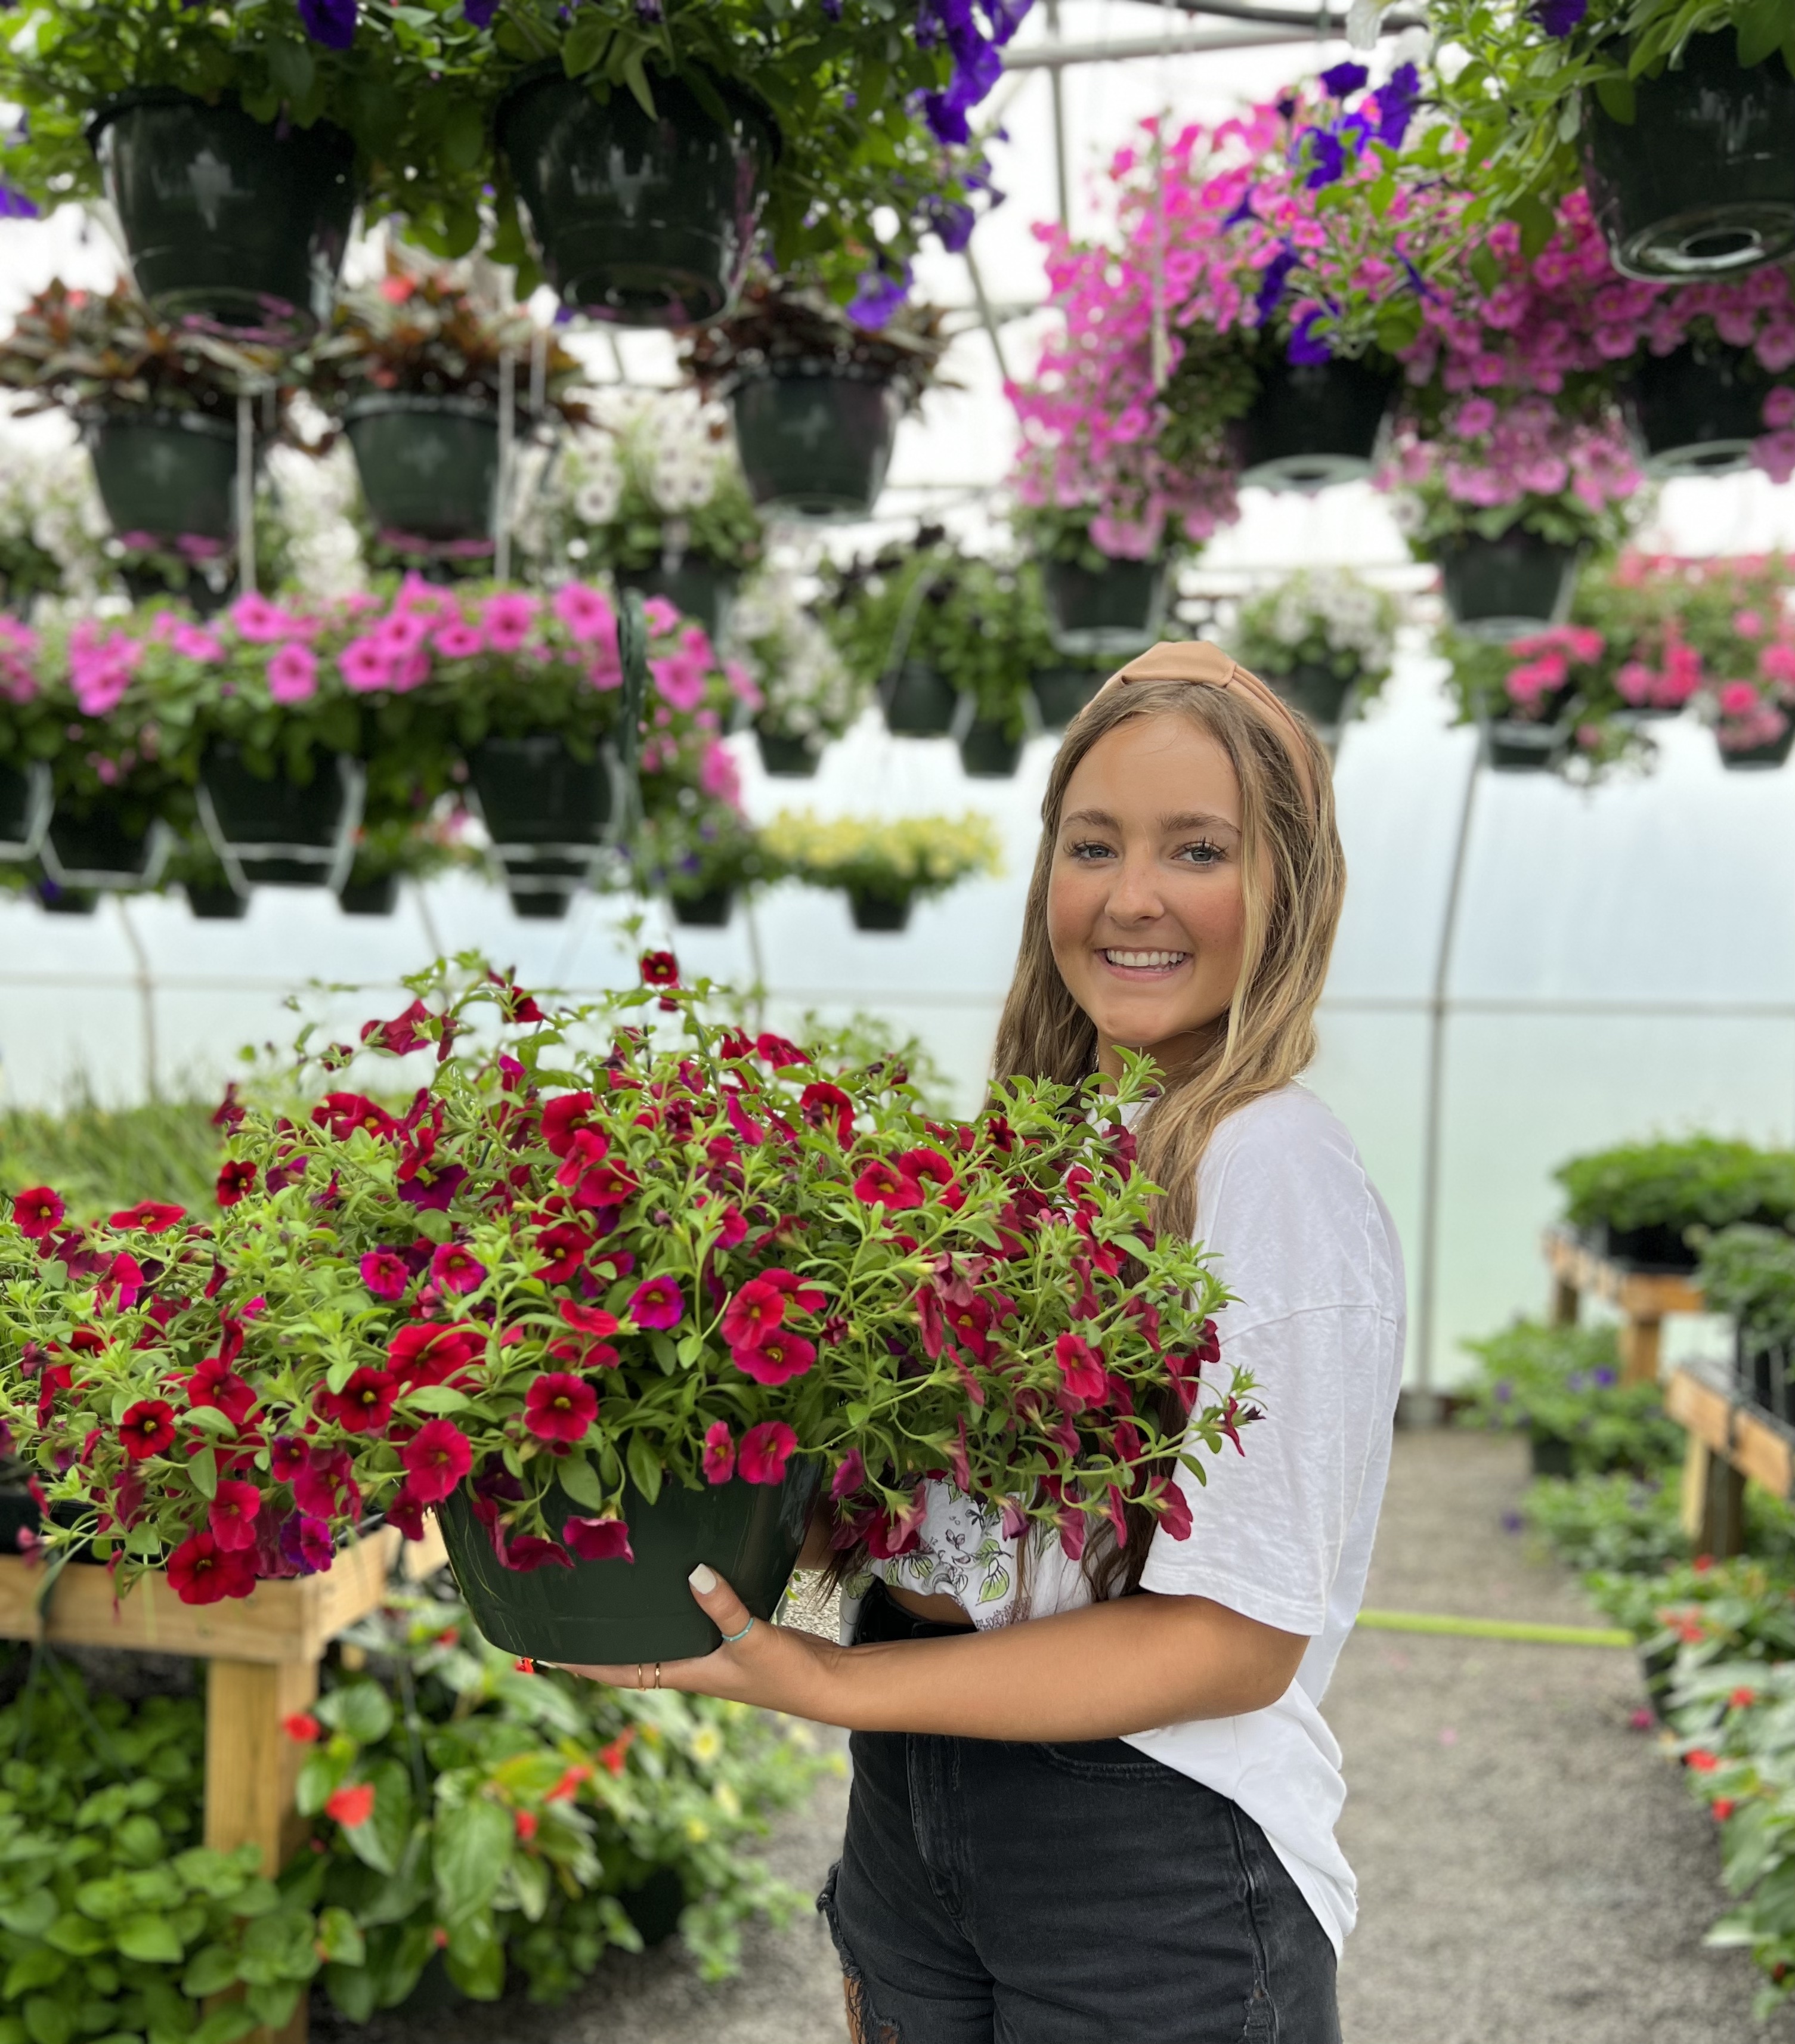 MCHS student in greenhouse